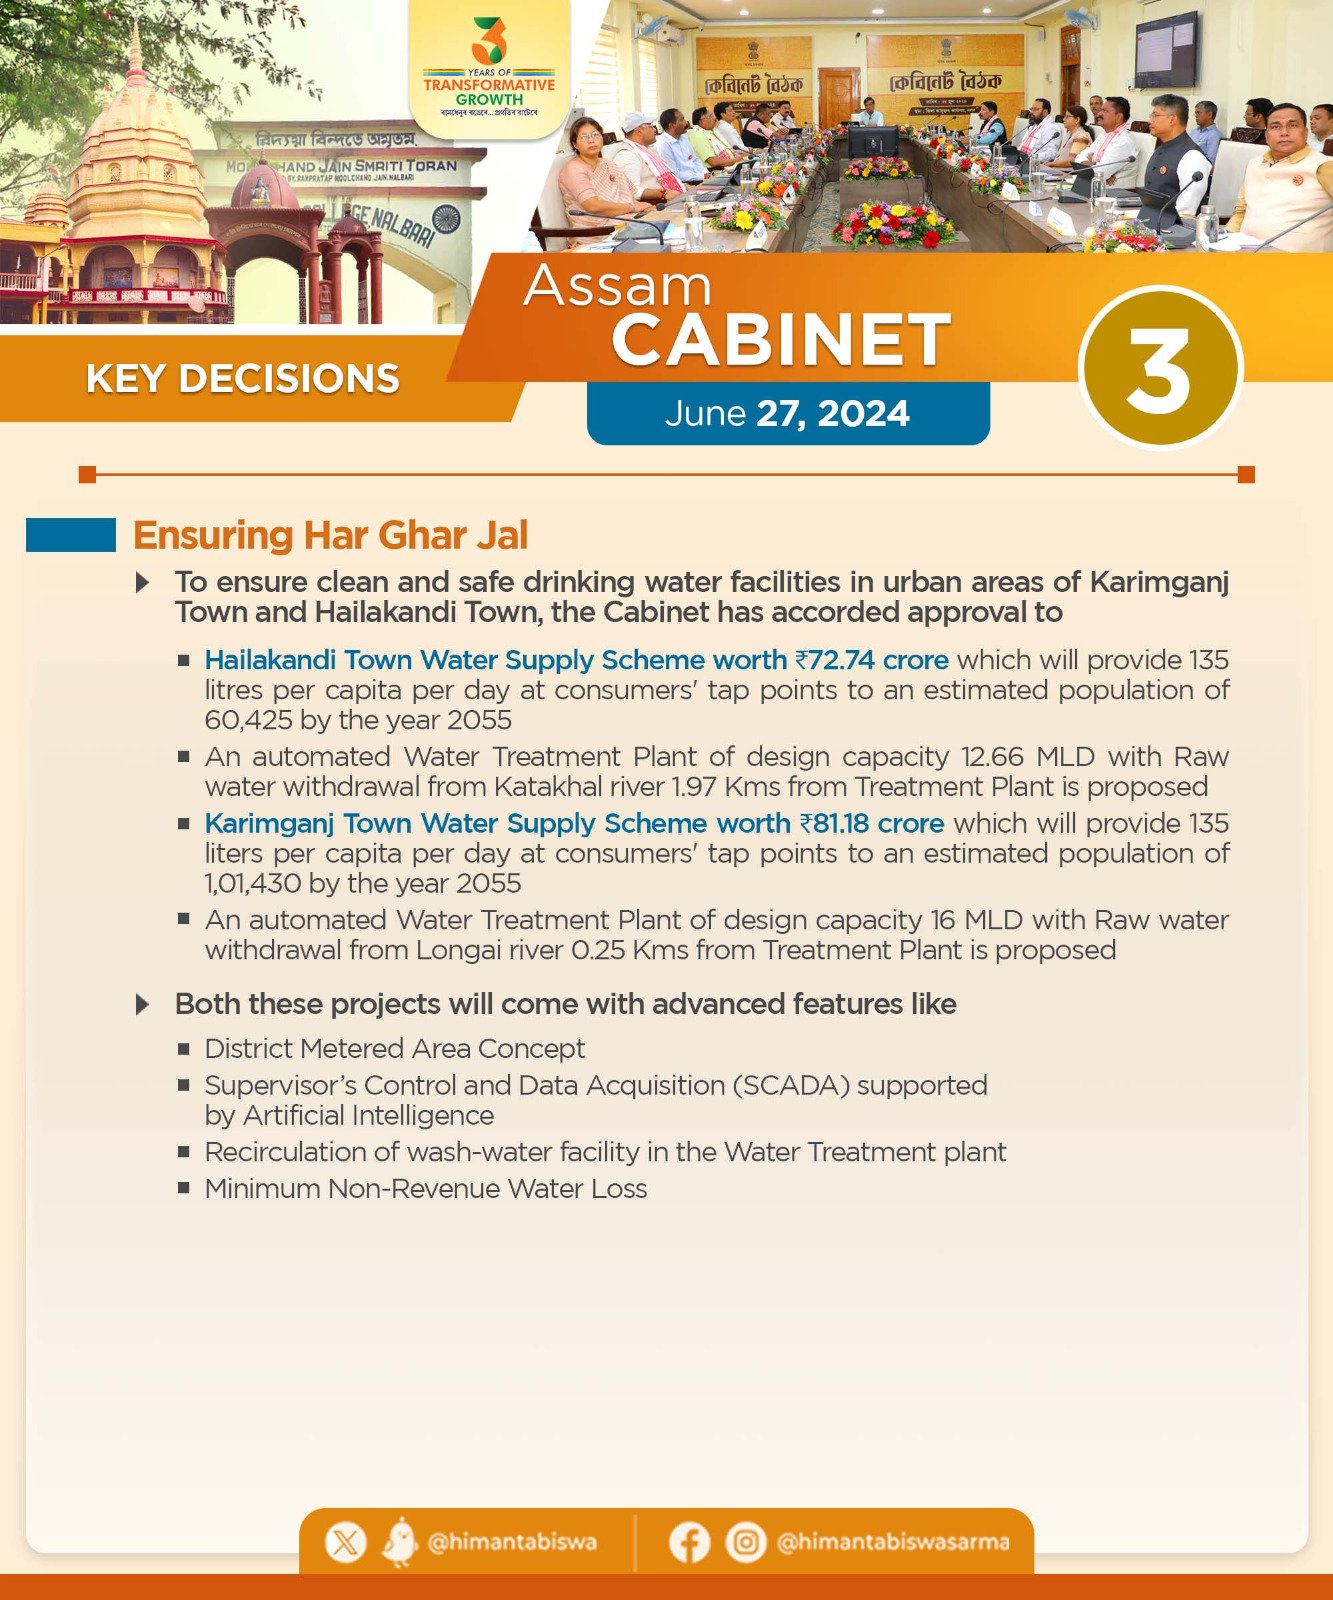 Cabinet Decision on 27th June, 2024 (3)